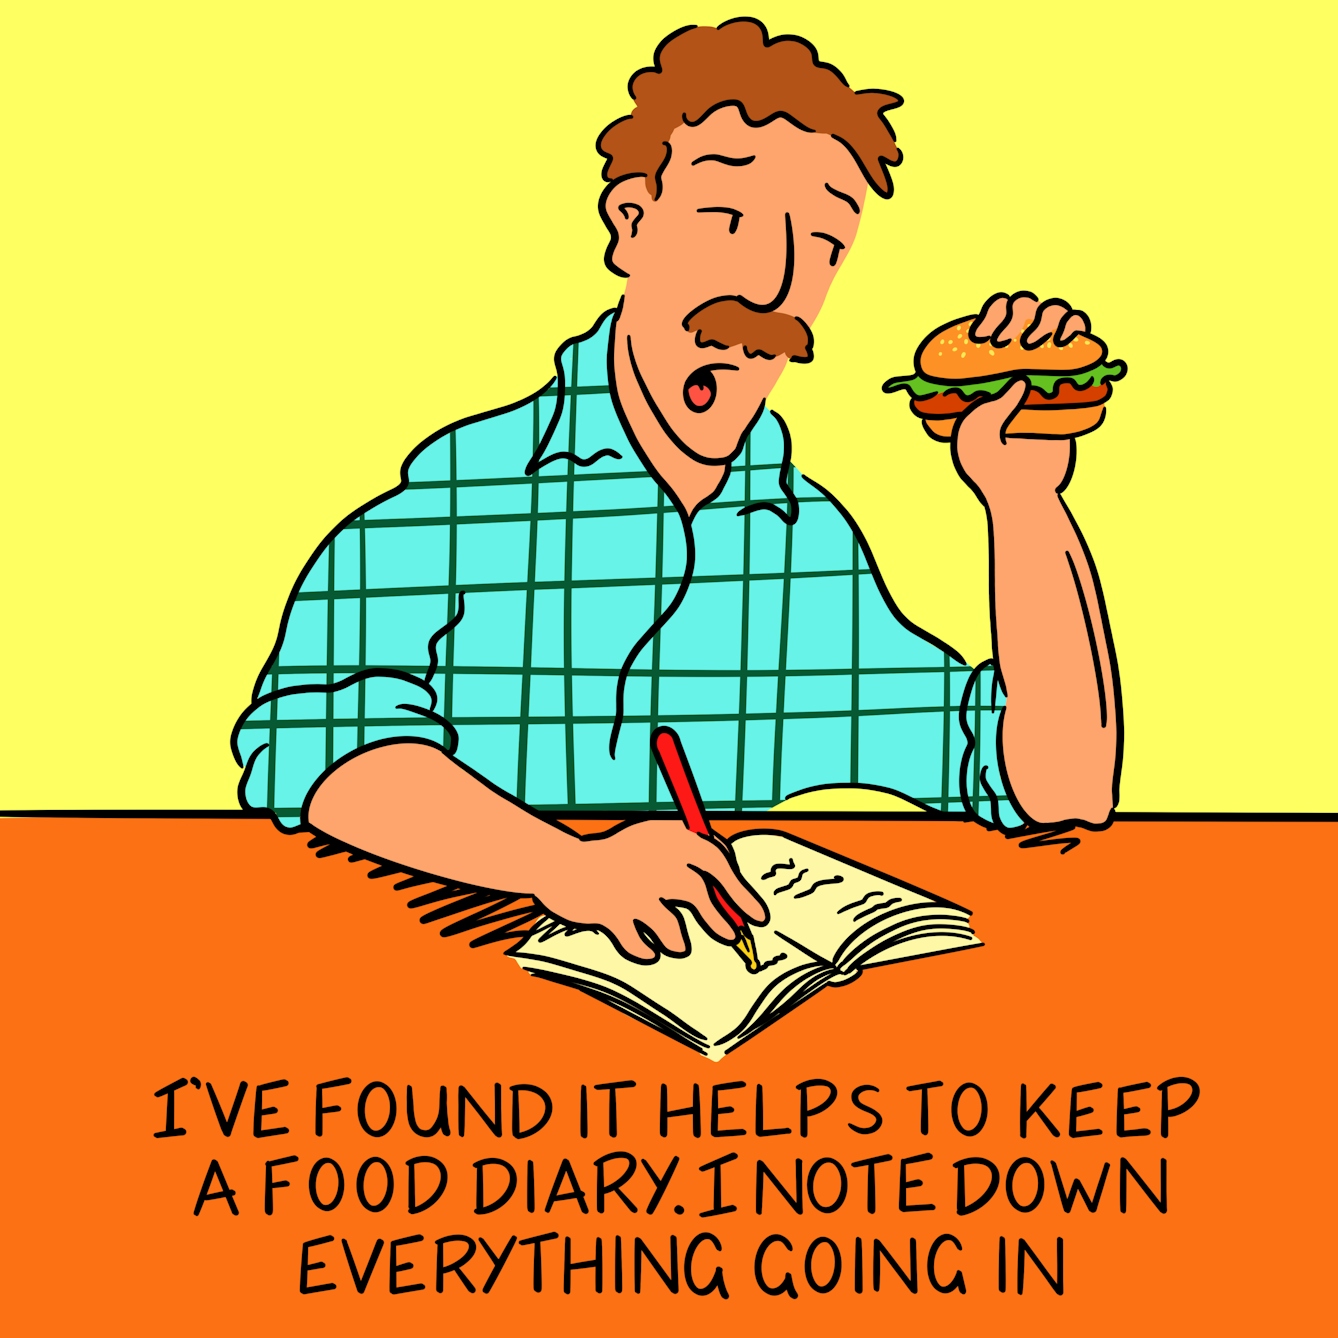 Panel 1 of a four-panel comic drawn digitally: a white man with a moustache and a plaid shirt sits poised to put a burger in his mouth with his left hand, his right hand holding a pen and writing in a notebook. The caption text reads "I've found it helps to keep a food diary. I note down everything going in..."